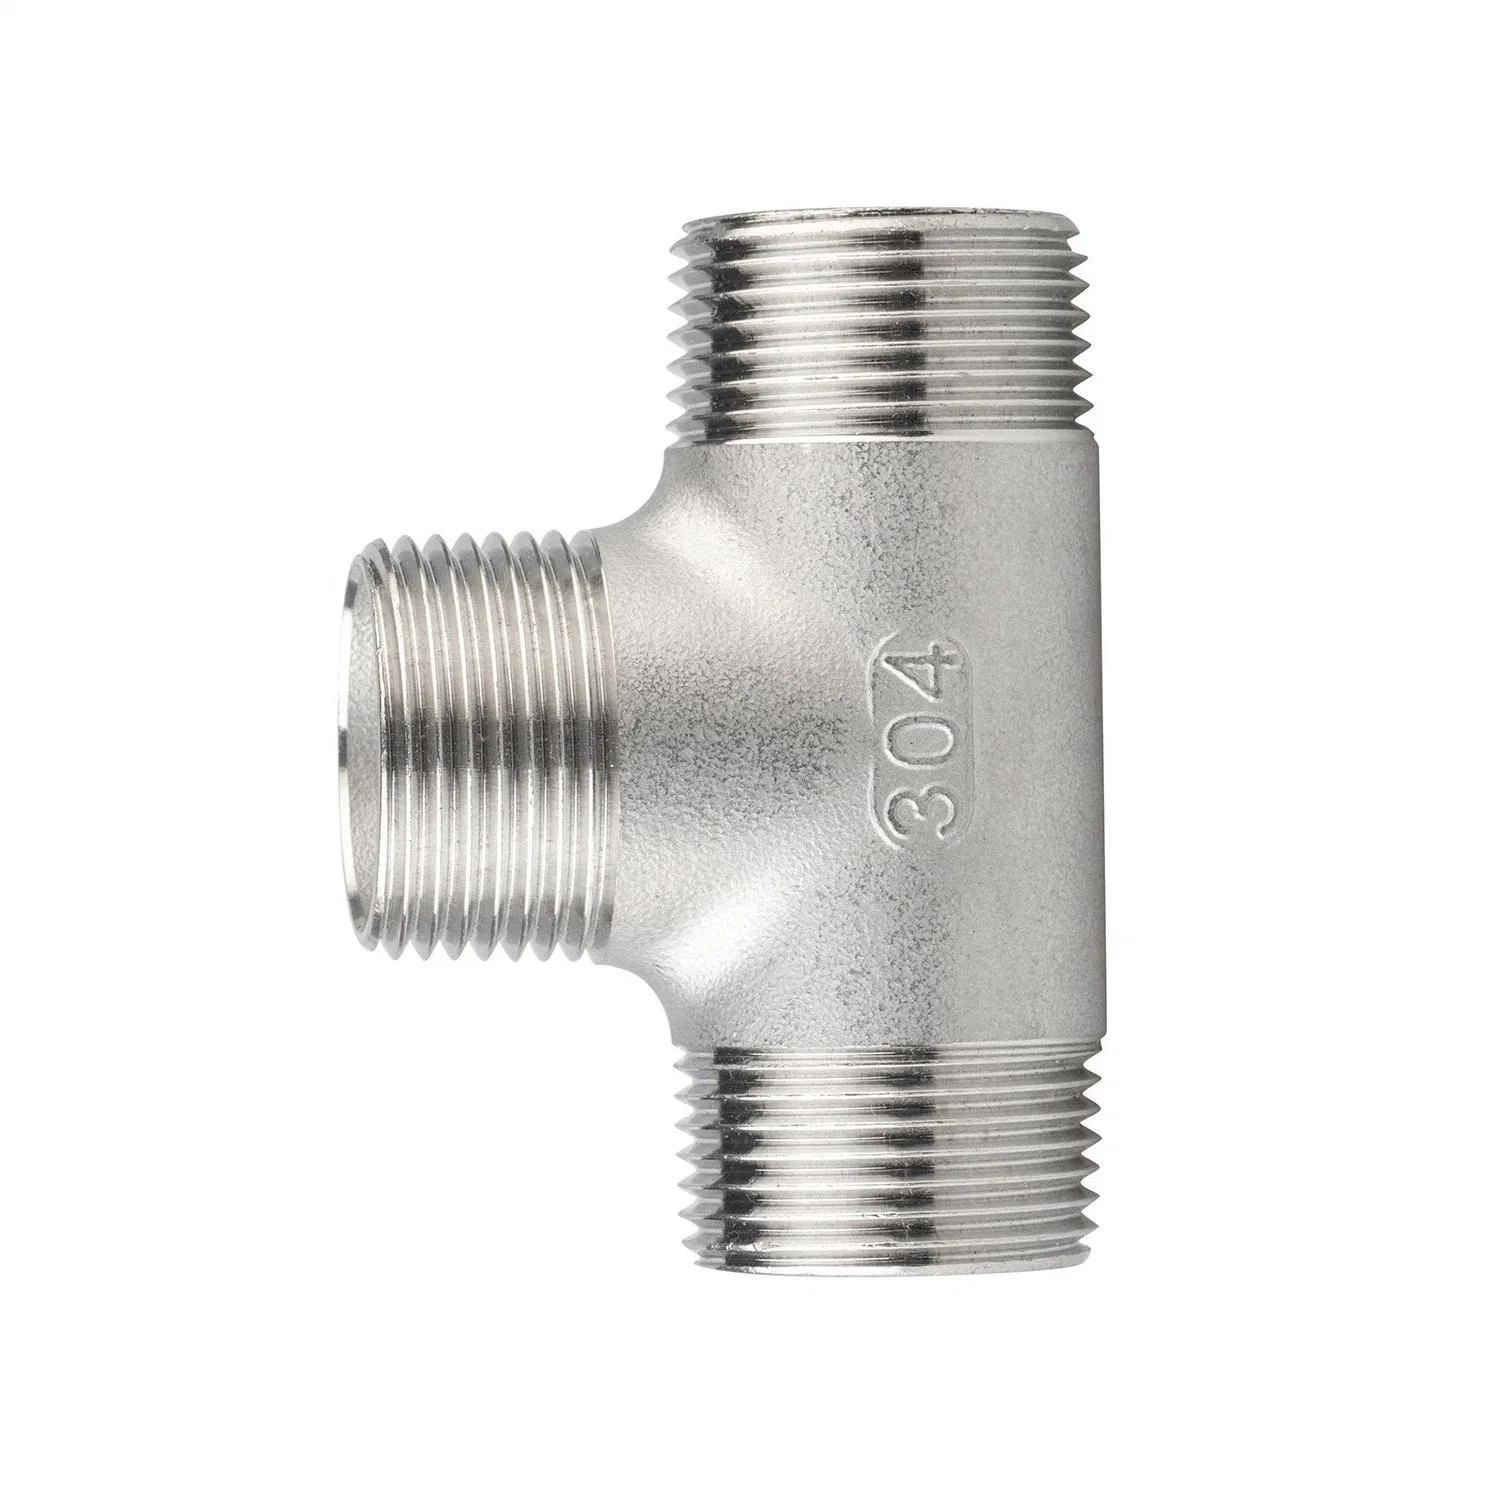 Stainless Steel Pipe Fittings 304 1/4"-4" NPT/BSPT Male Threaded Tee Fitting